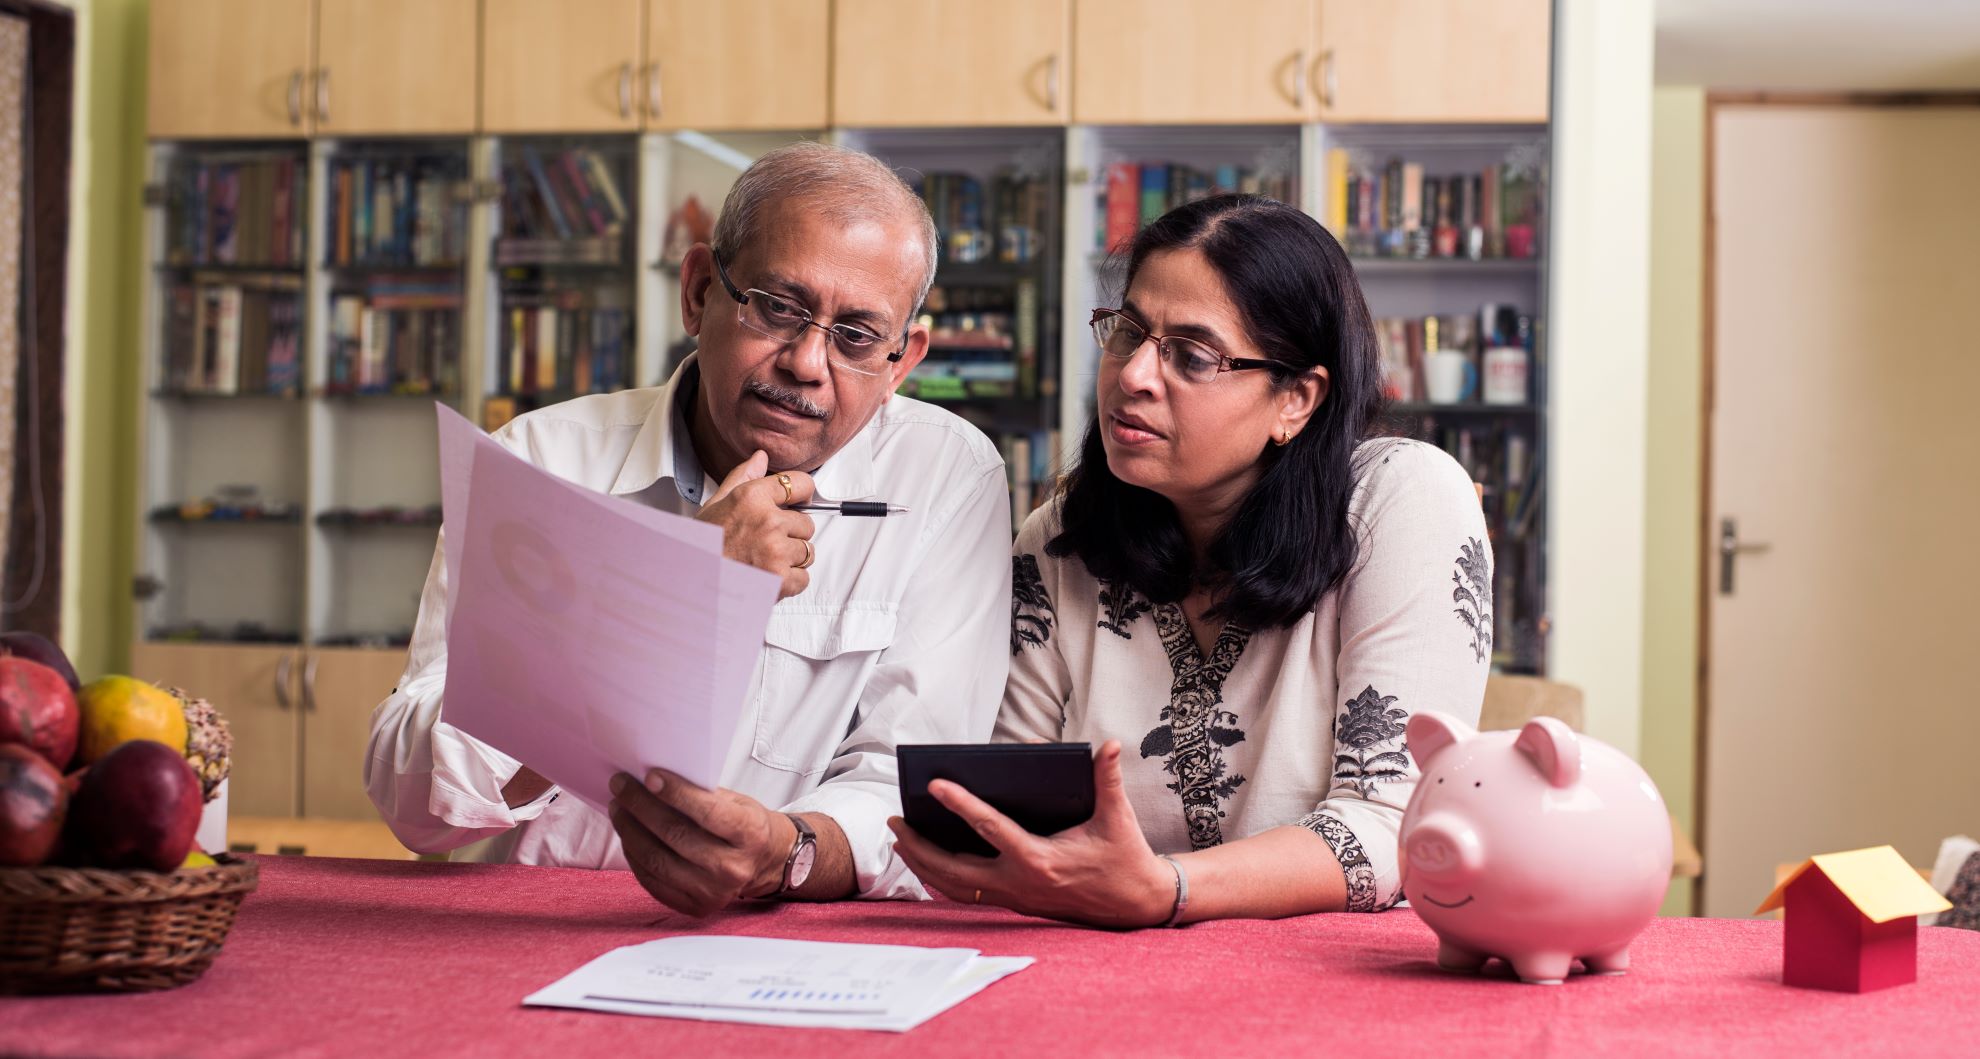 Two adults at home reviewing financial documents